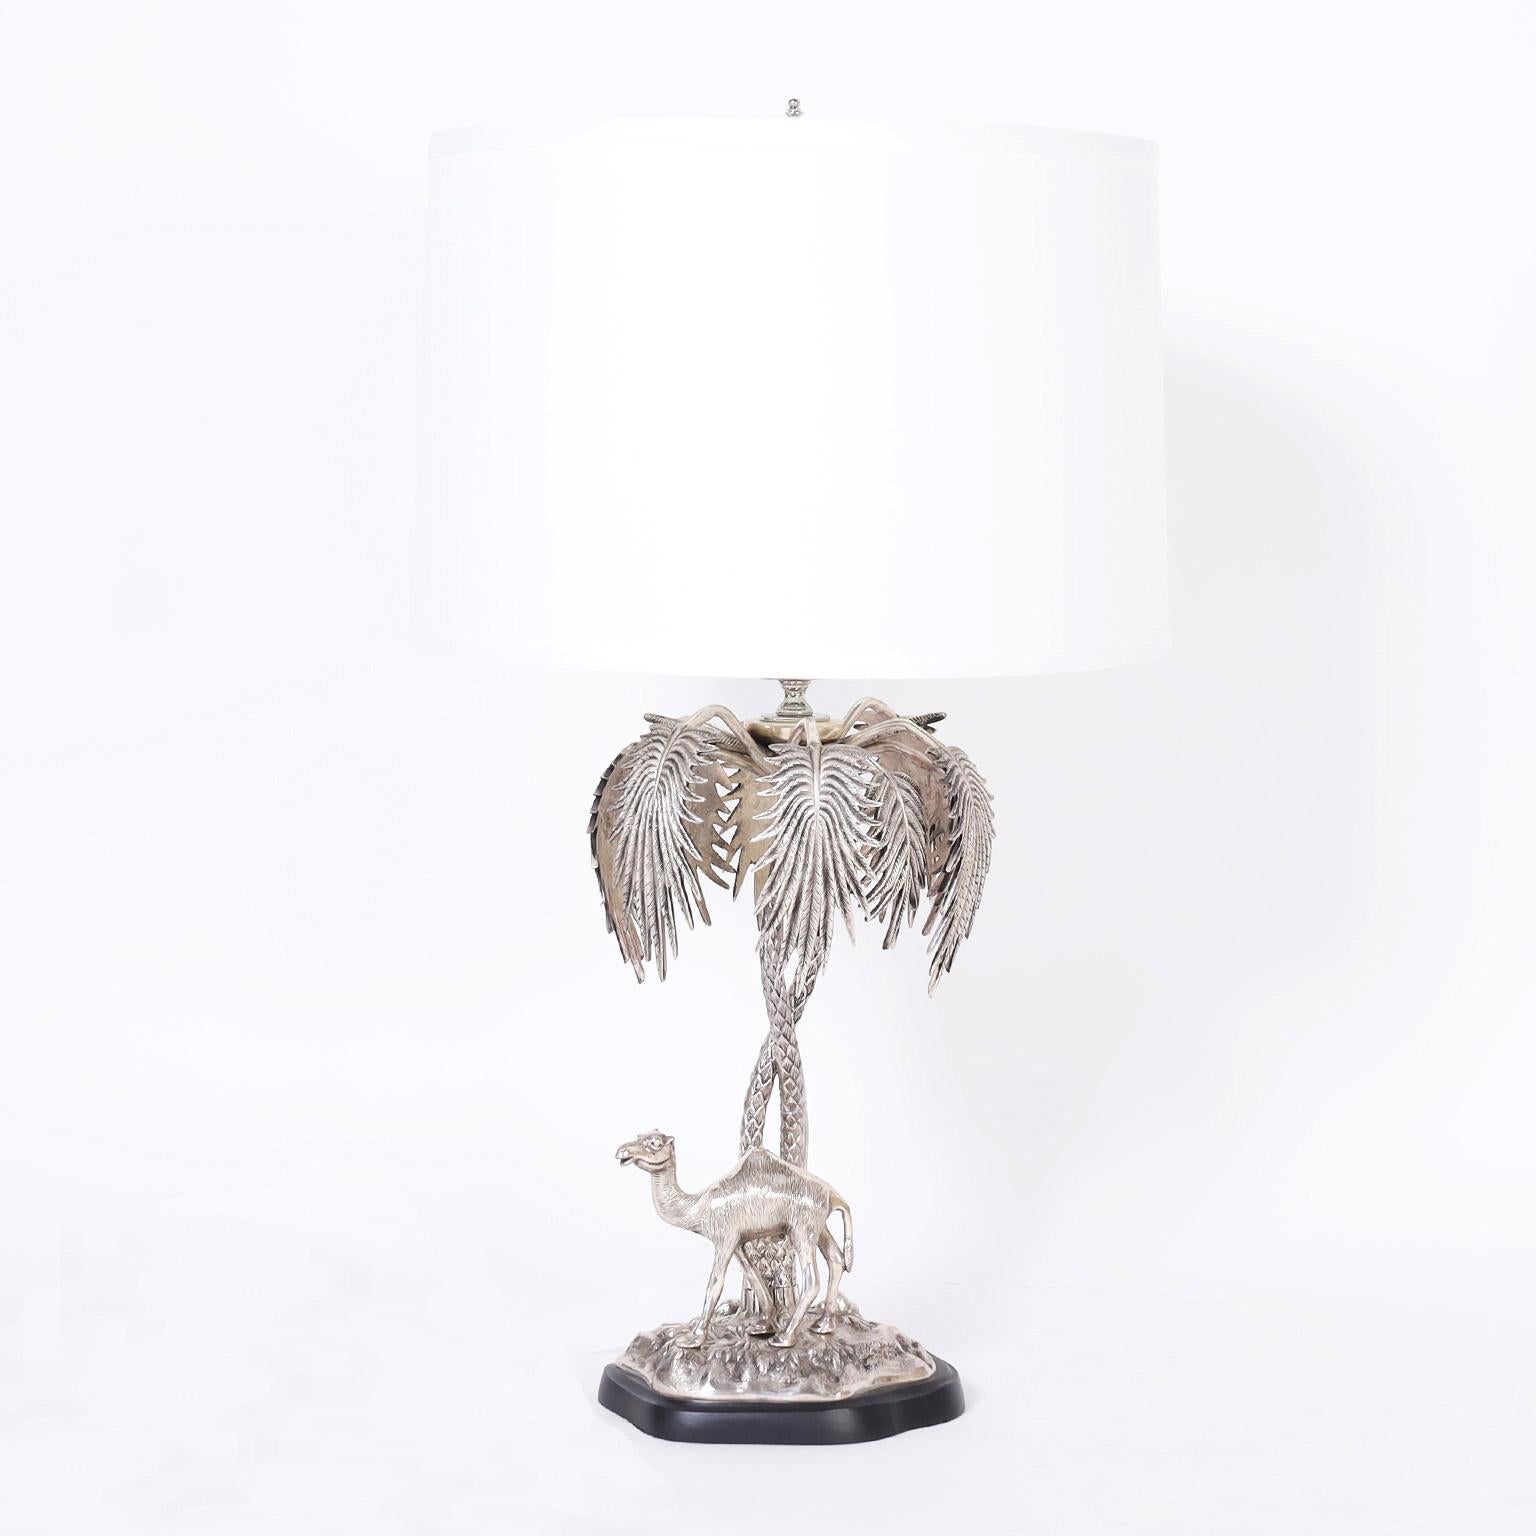 Pair of English table lamps crafted in silver plate over cast brass depicting a camel and an elephant under palm trees on terra firma bases.